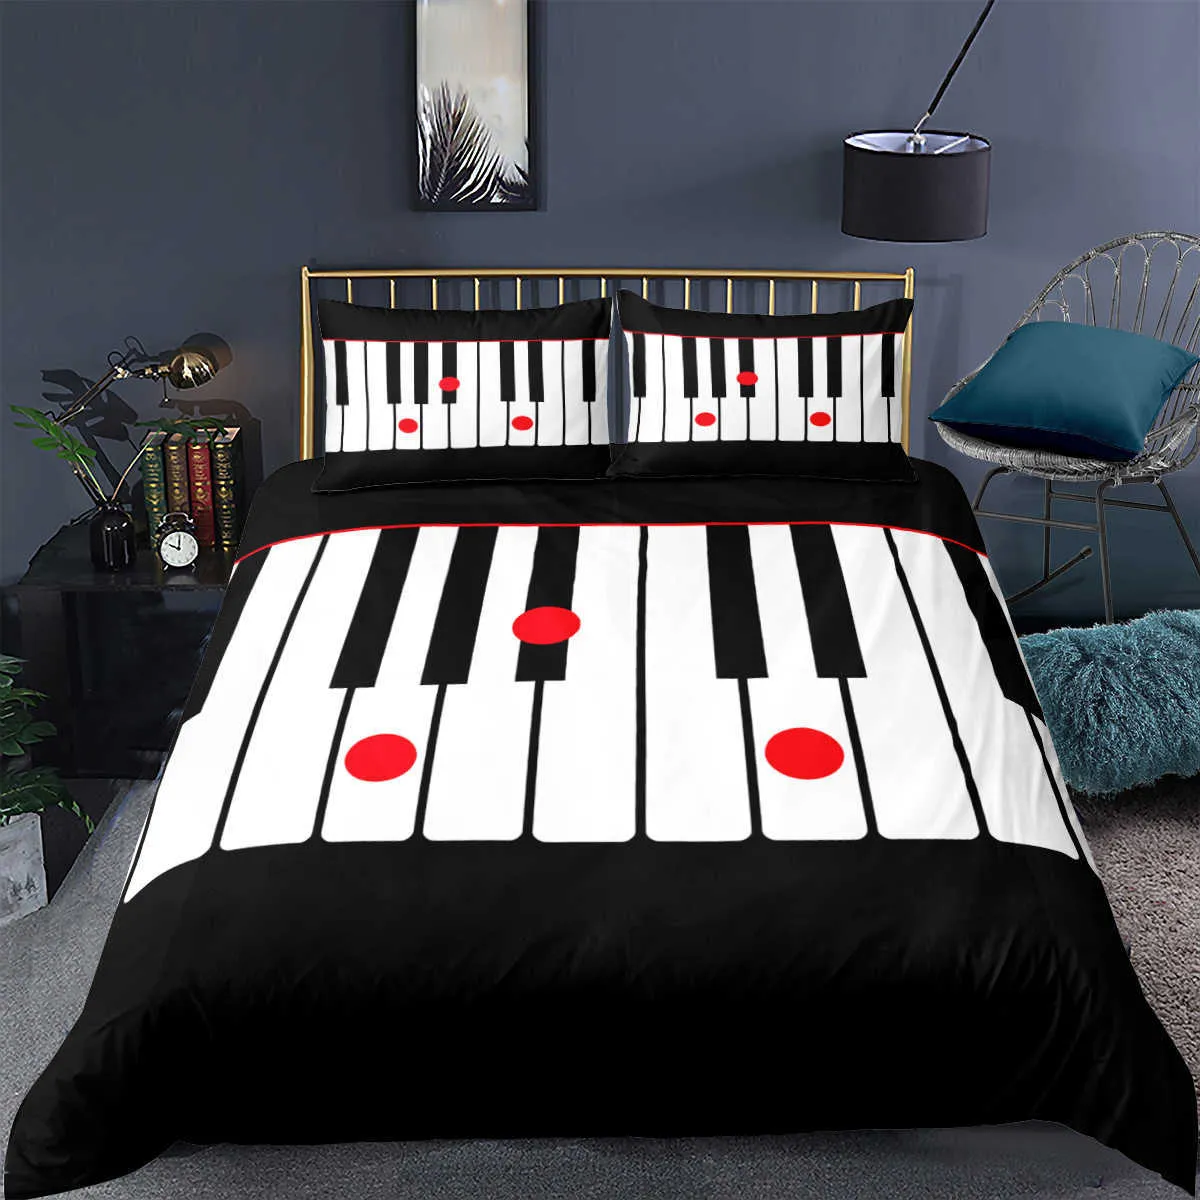 Piano Music Note Printed Bedding Set 3D Luxury Bed Set Comforters Adults Kids Däcke Cover Pudowcase Twin Queen King Size H09139616064